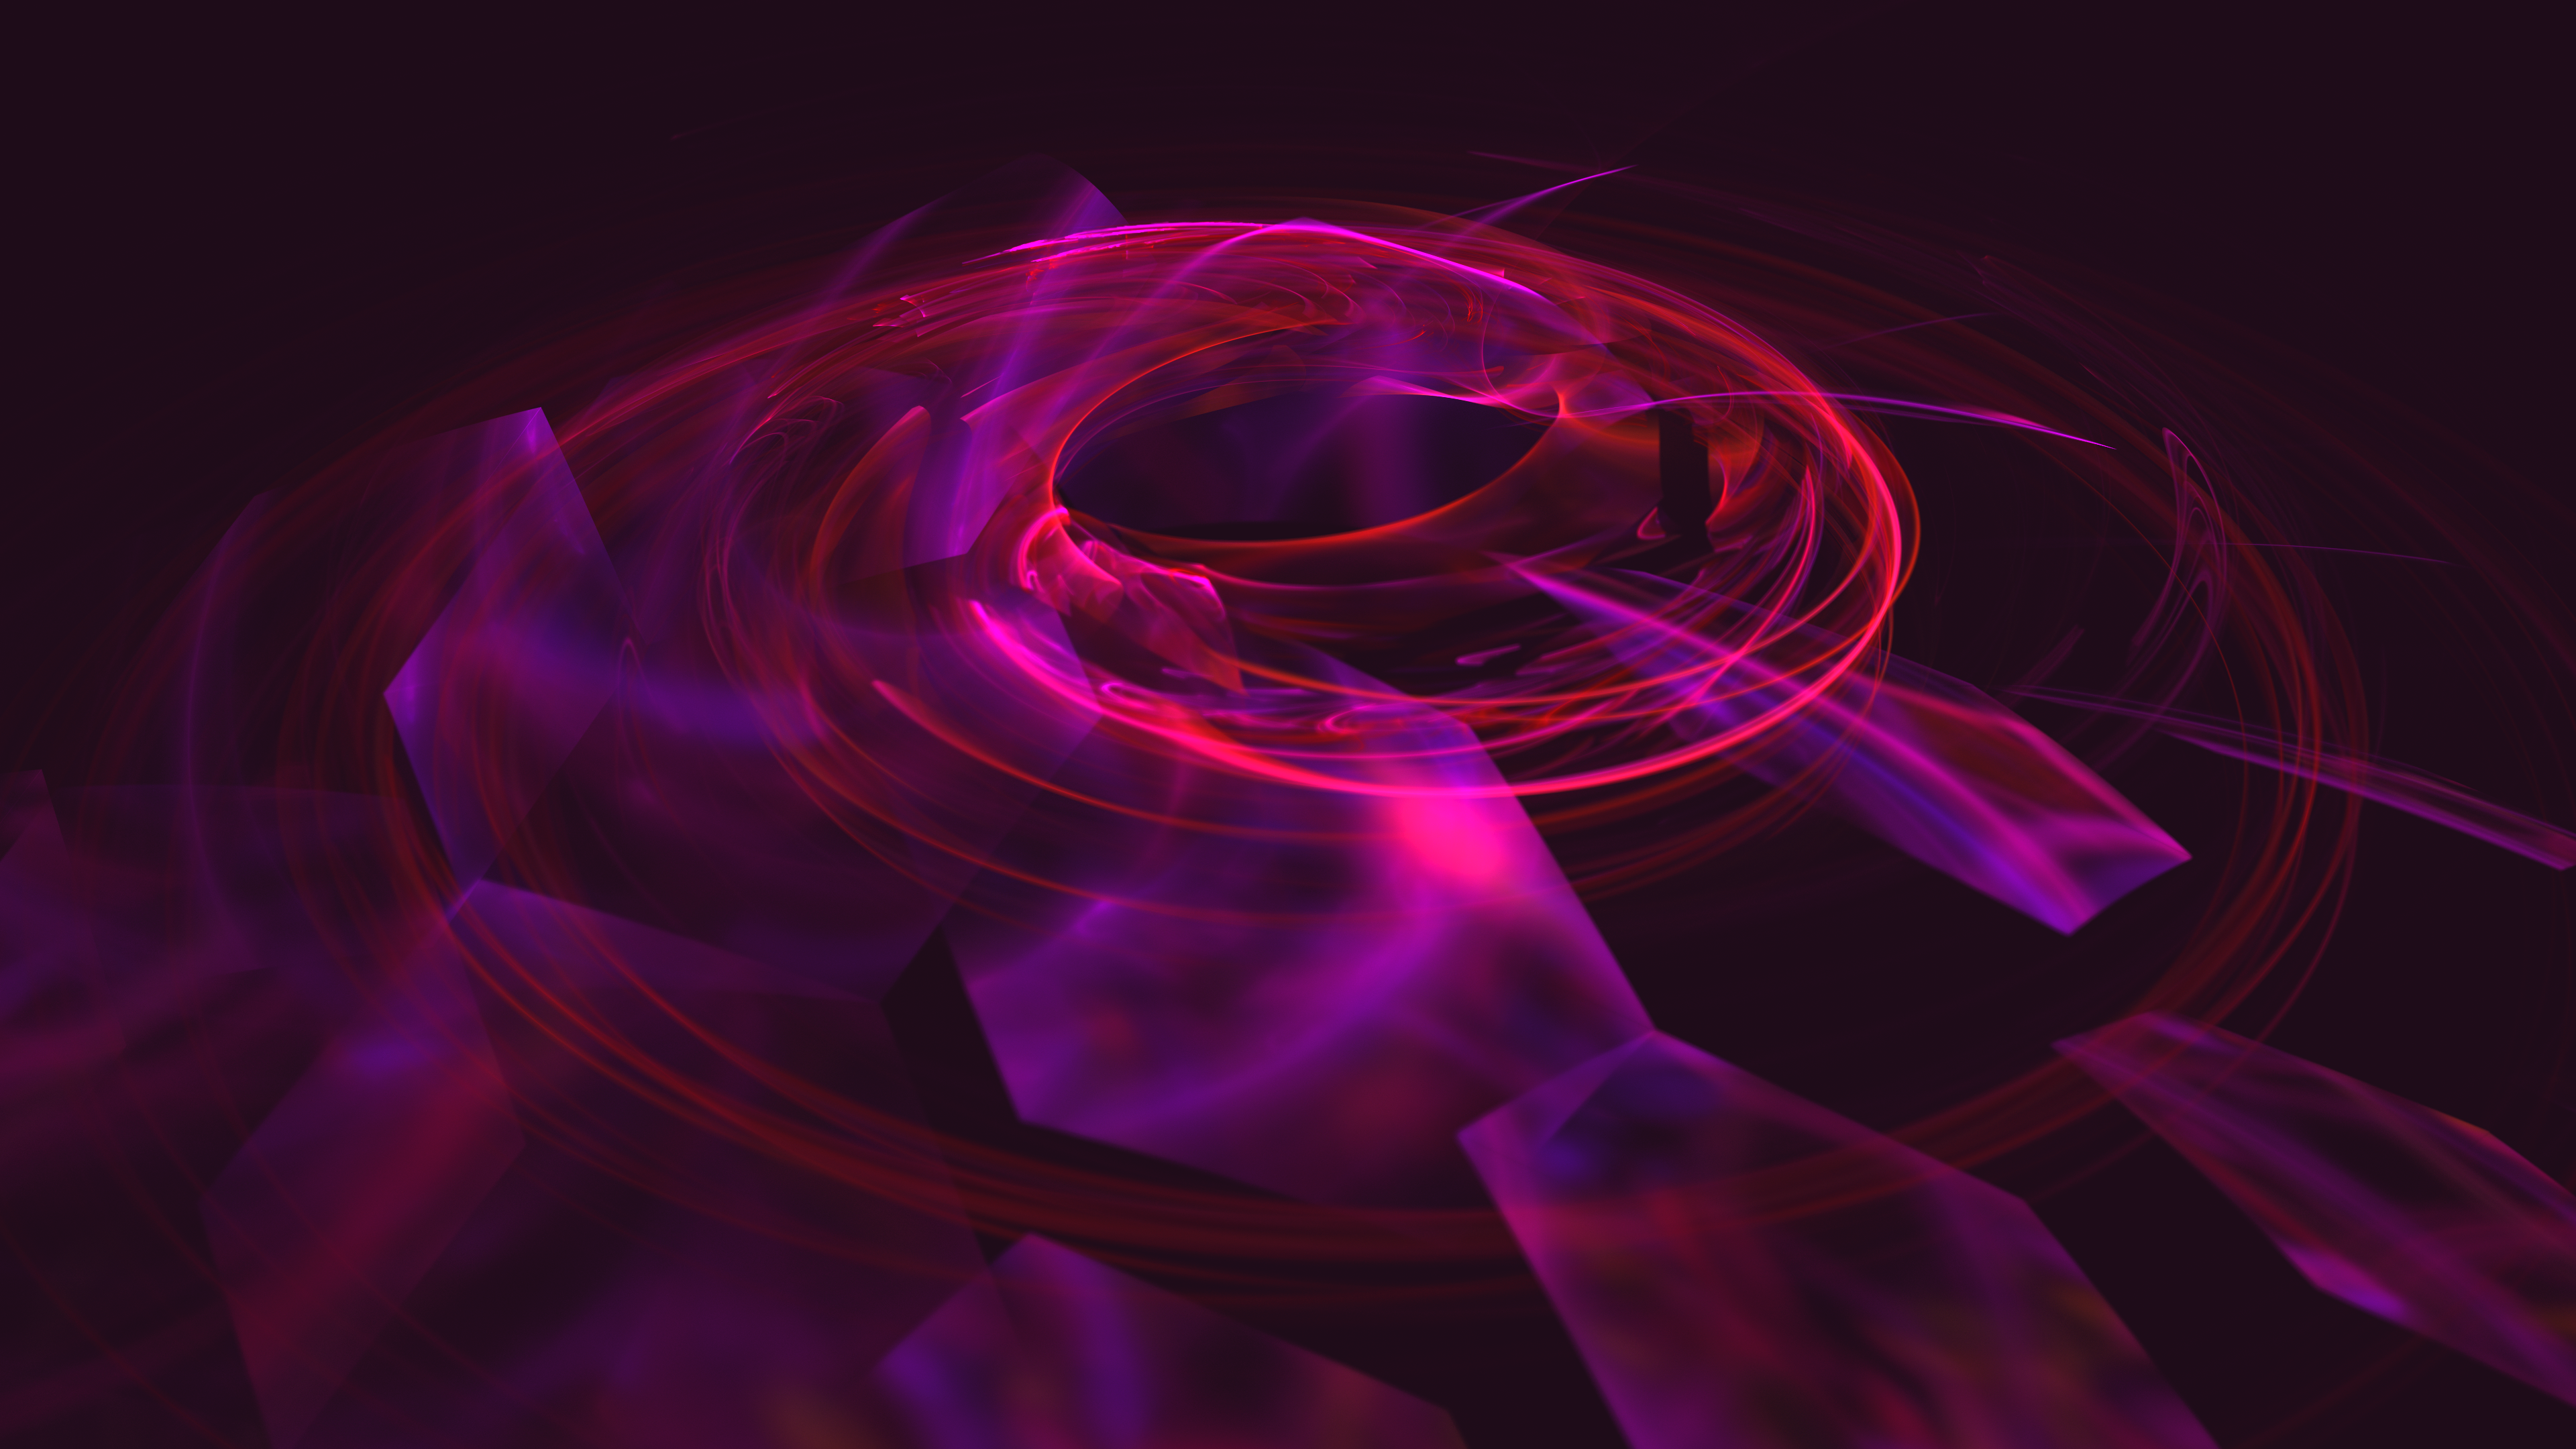 Abstract 3D Abstract Apophysis Fractal 3840x2160